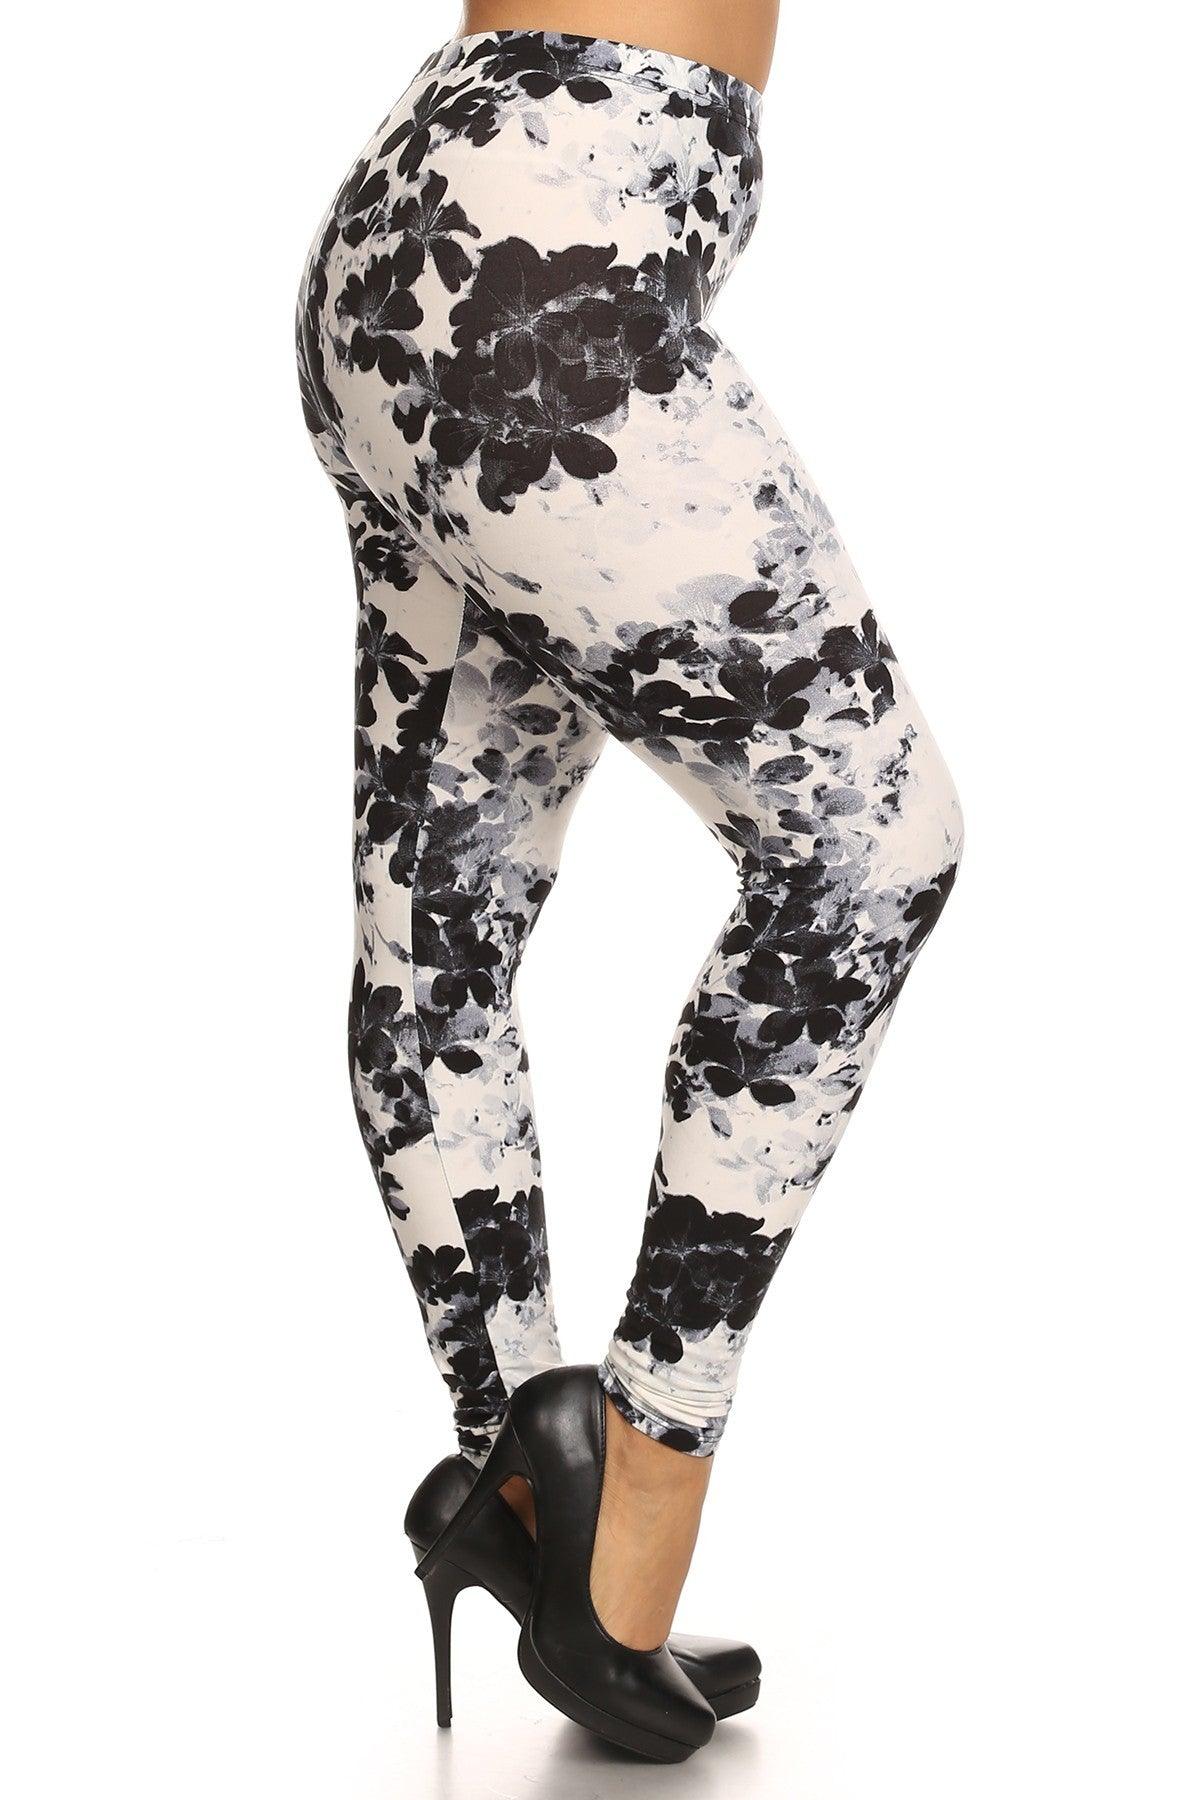 Super Soft Peach Skin Fabric, Floral Graphic Printed Knit Legging With Elastic Waist Detail Naughty Smile Fashion